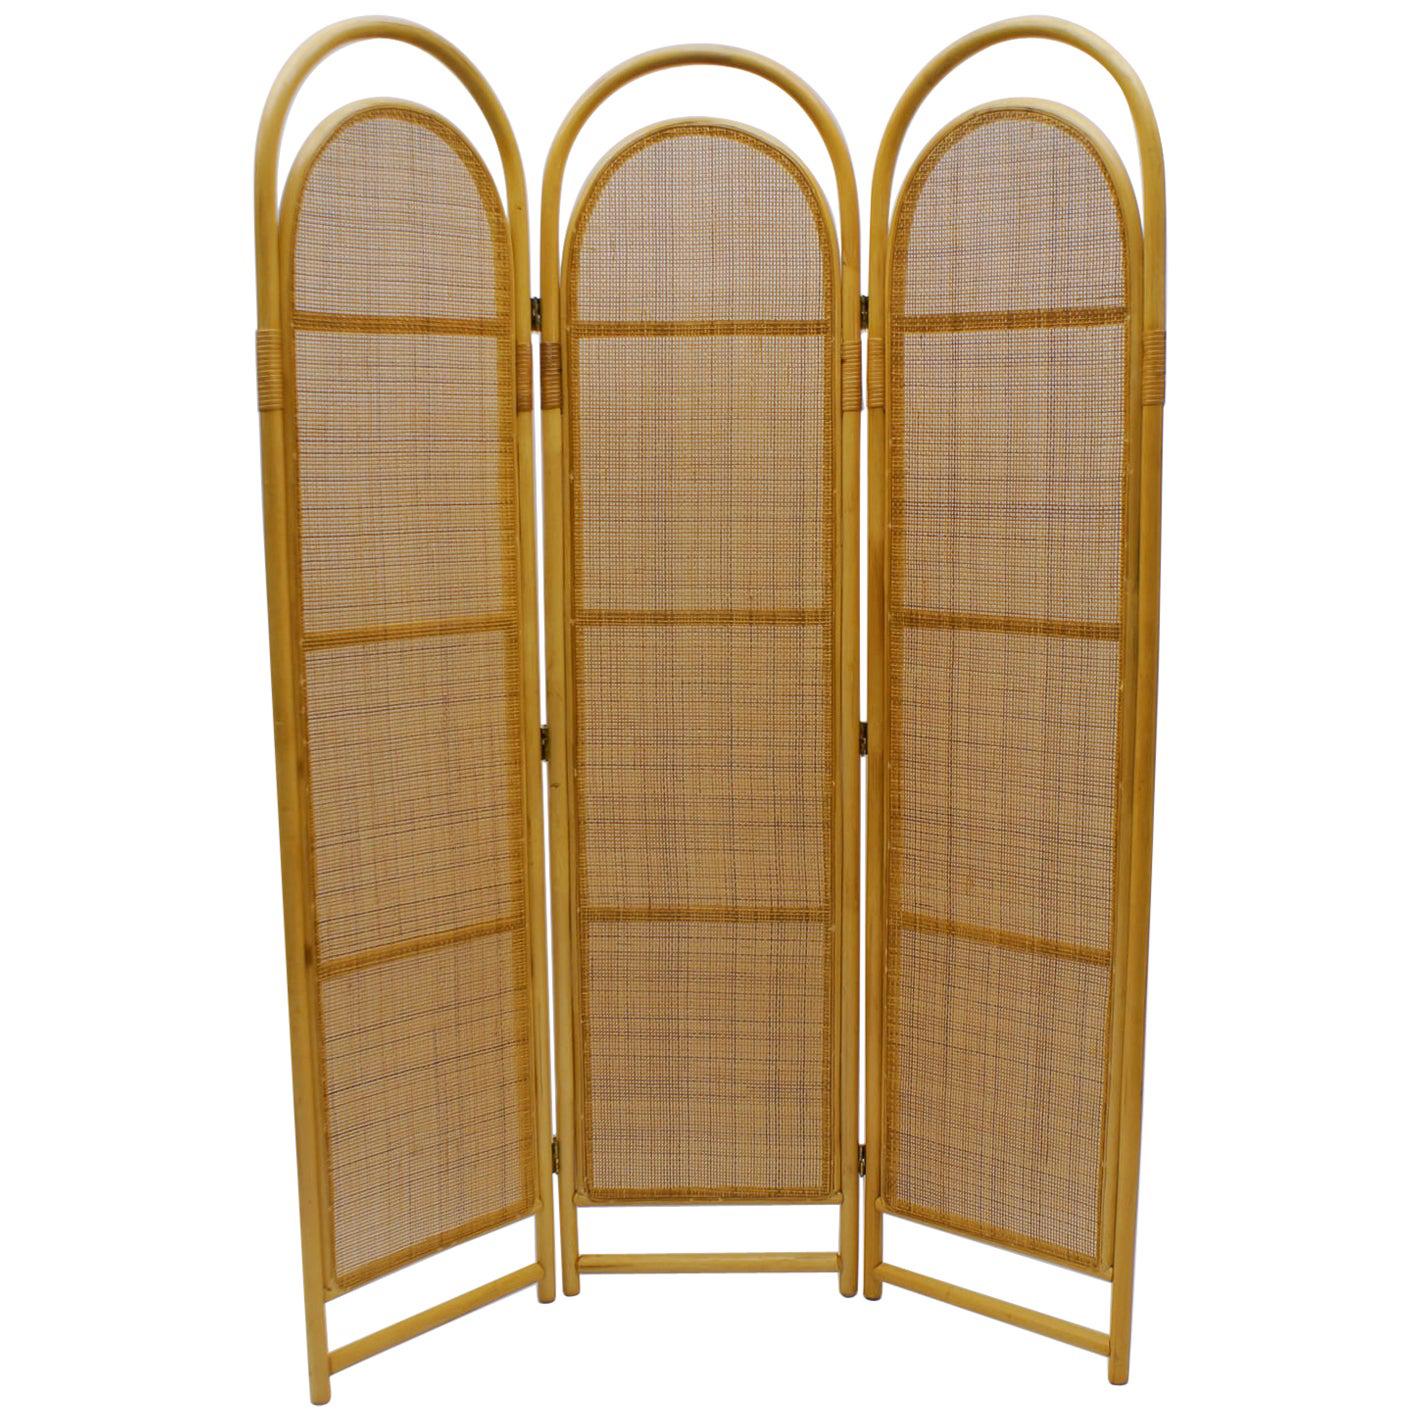 Sculptural Three-Panel Folding Screen Room Divider in Rattan and Wicker, 1960s